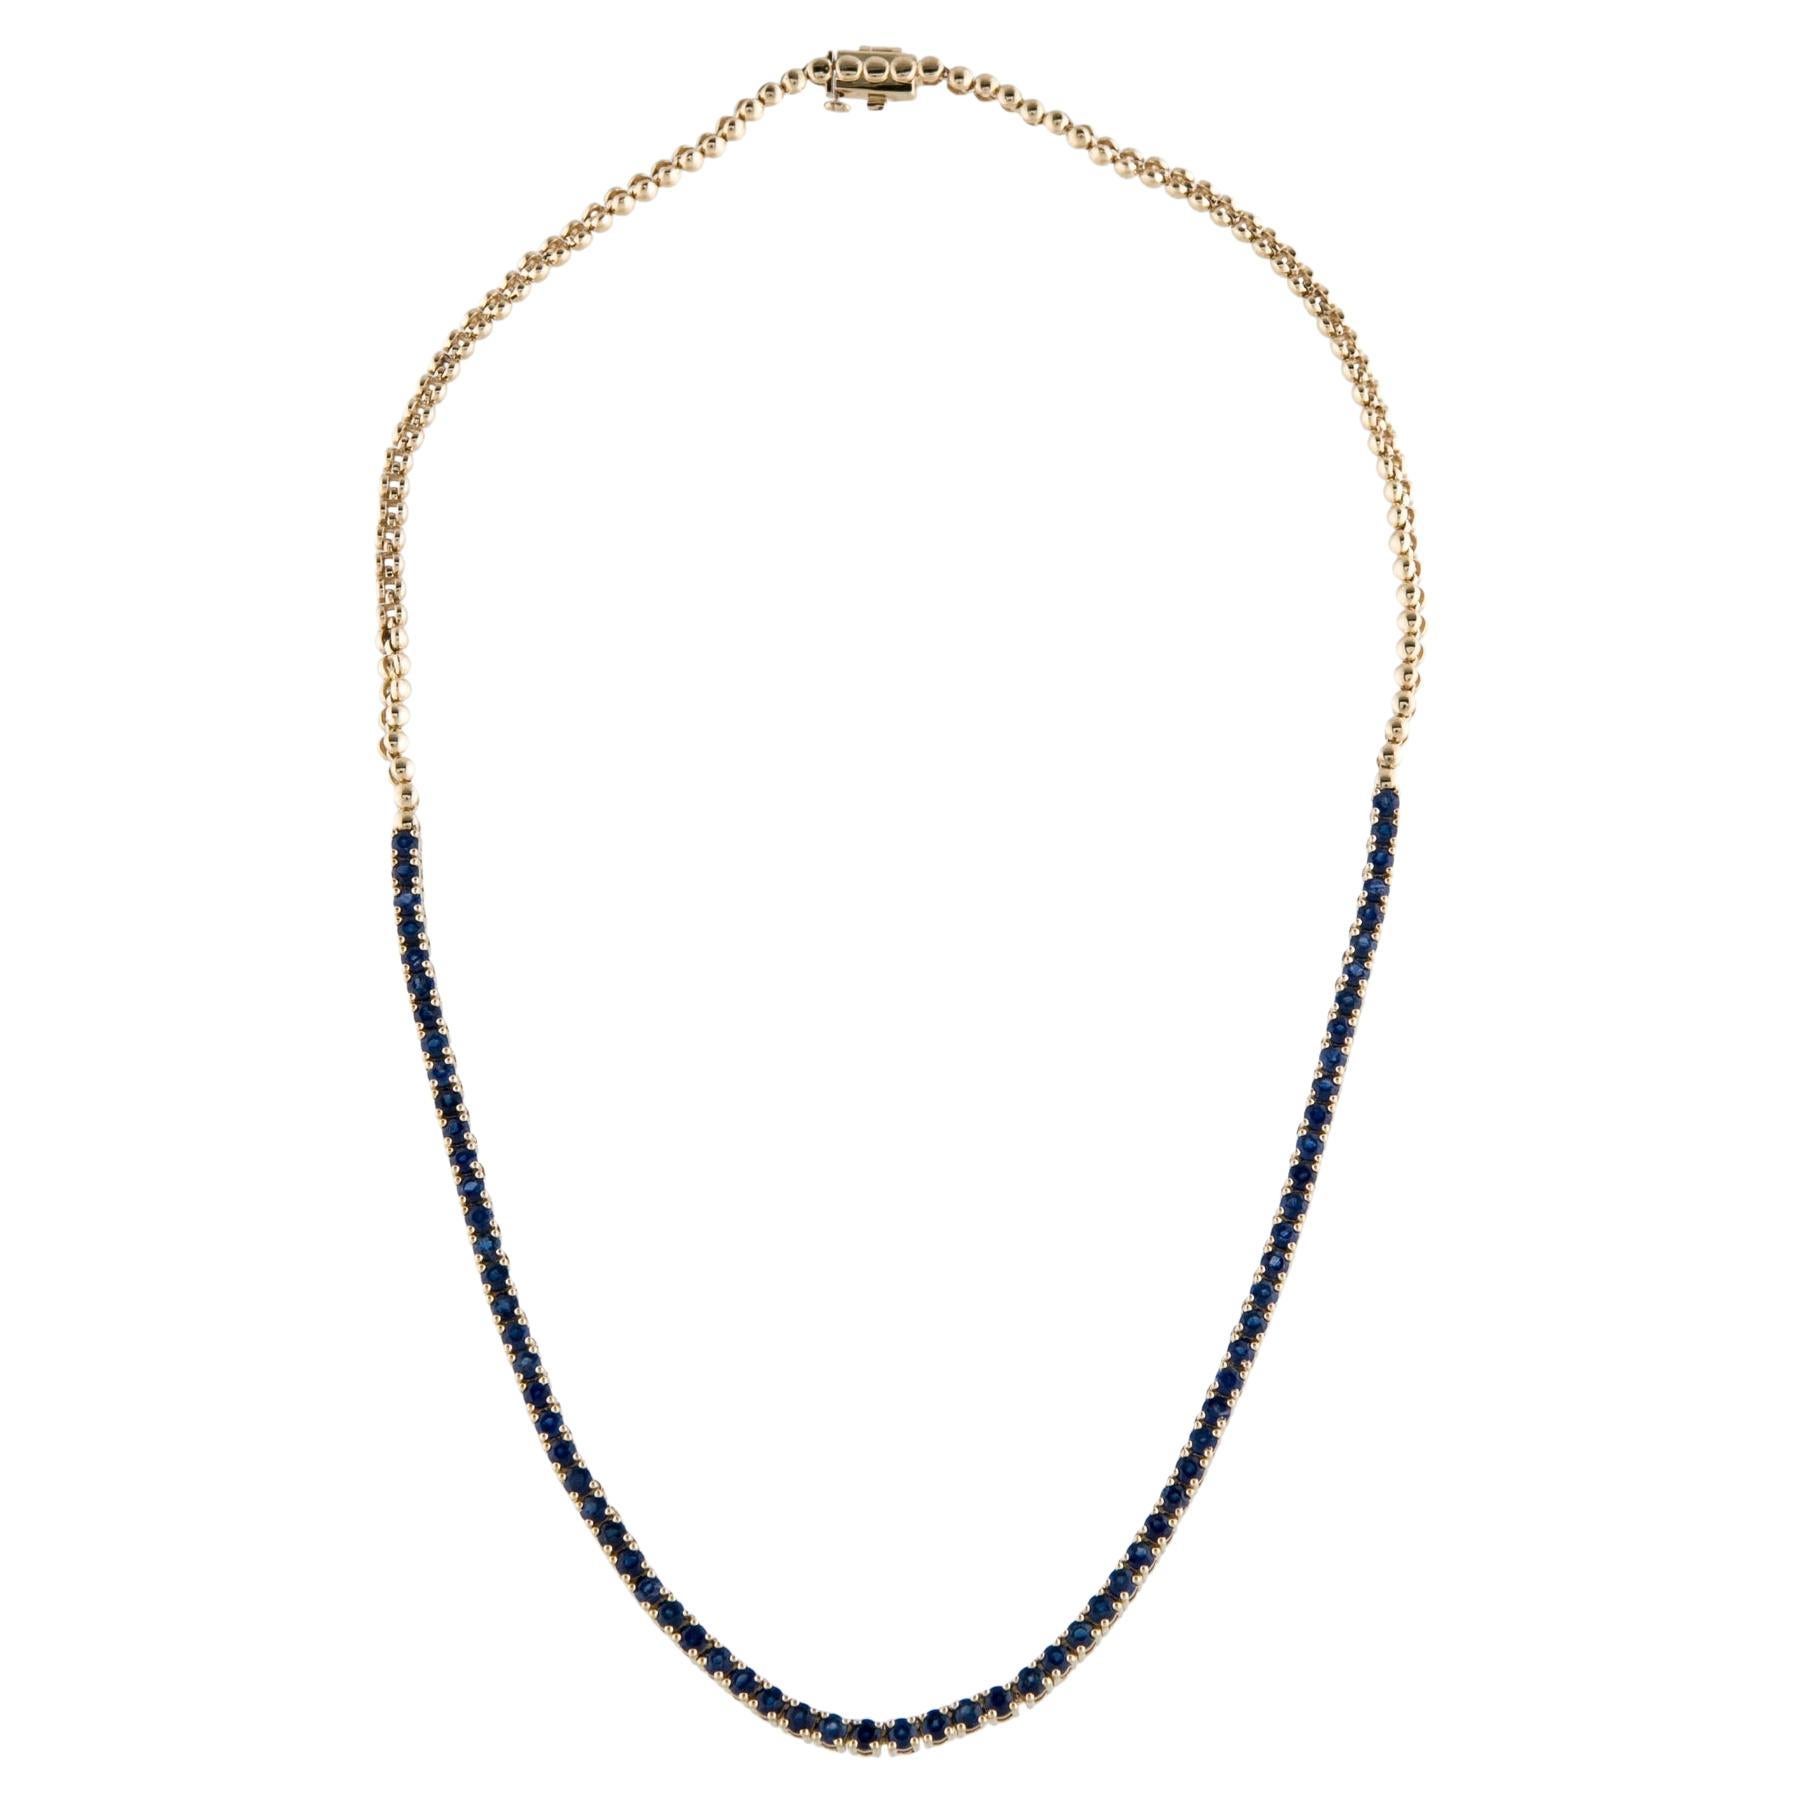 14K Sapphire Chain Necklace 7.03ctw  Stunning Jewelry Piece for Elegance